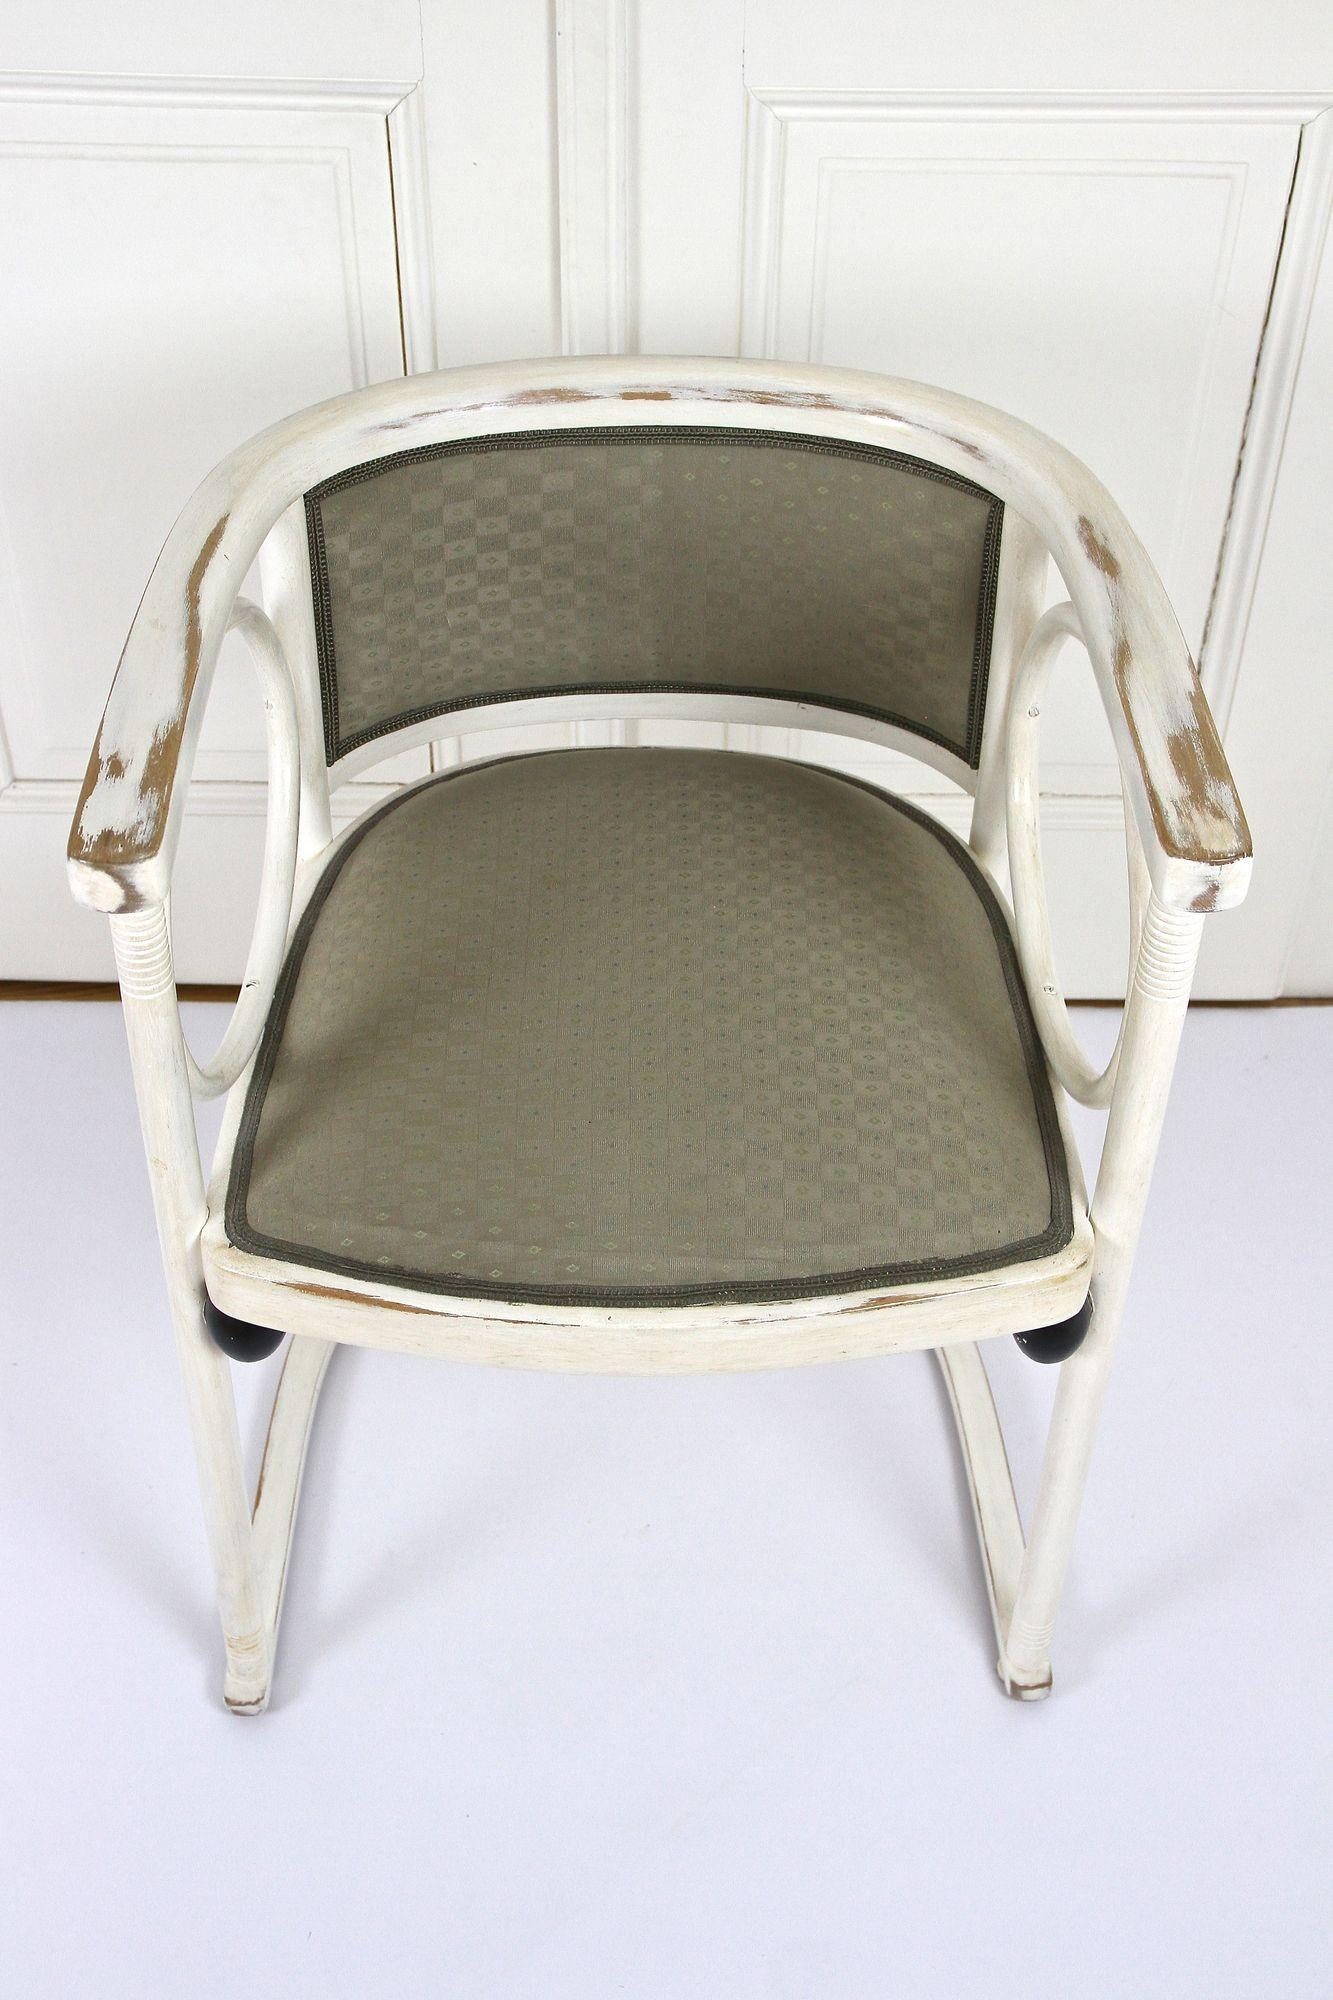 Art Nouveau Thonet Armchairs by Josef Hoffmann, White Lacquered, AT ca. 1905 For Sale 6